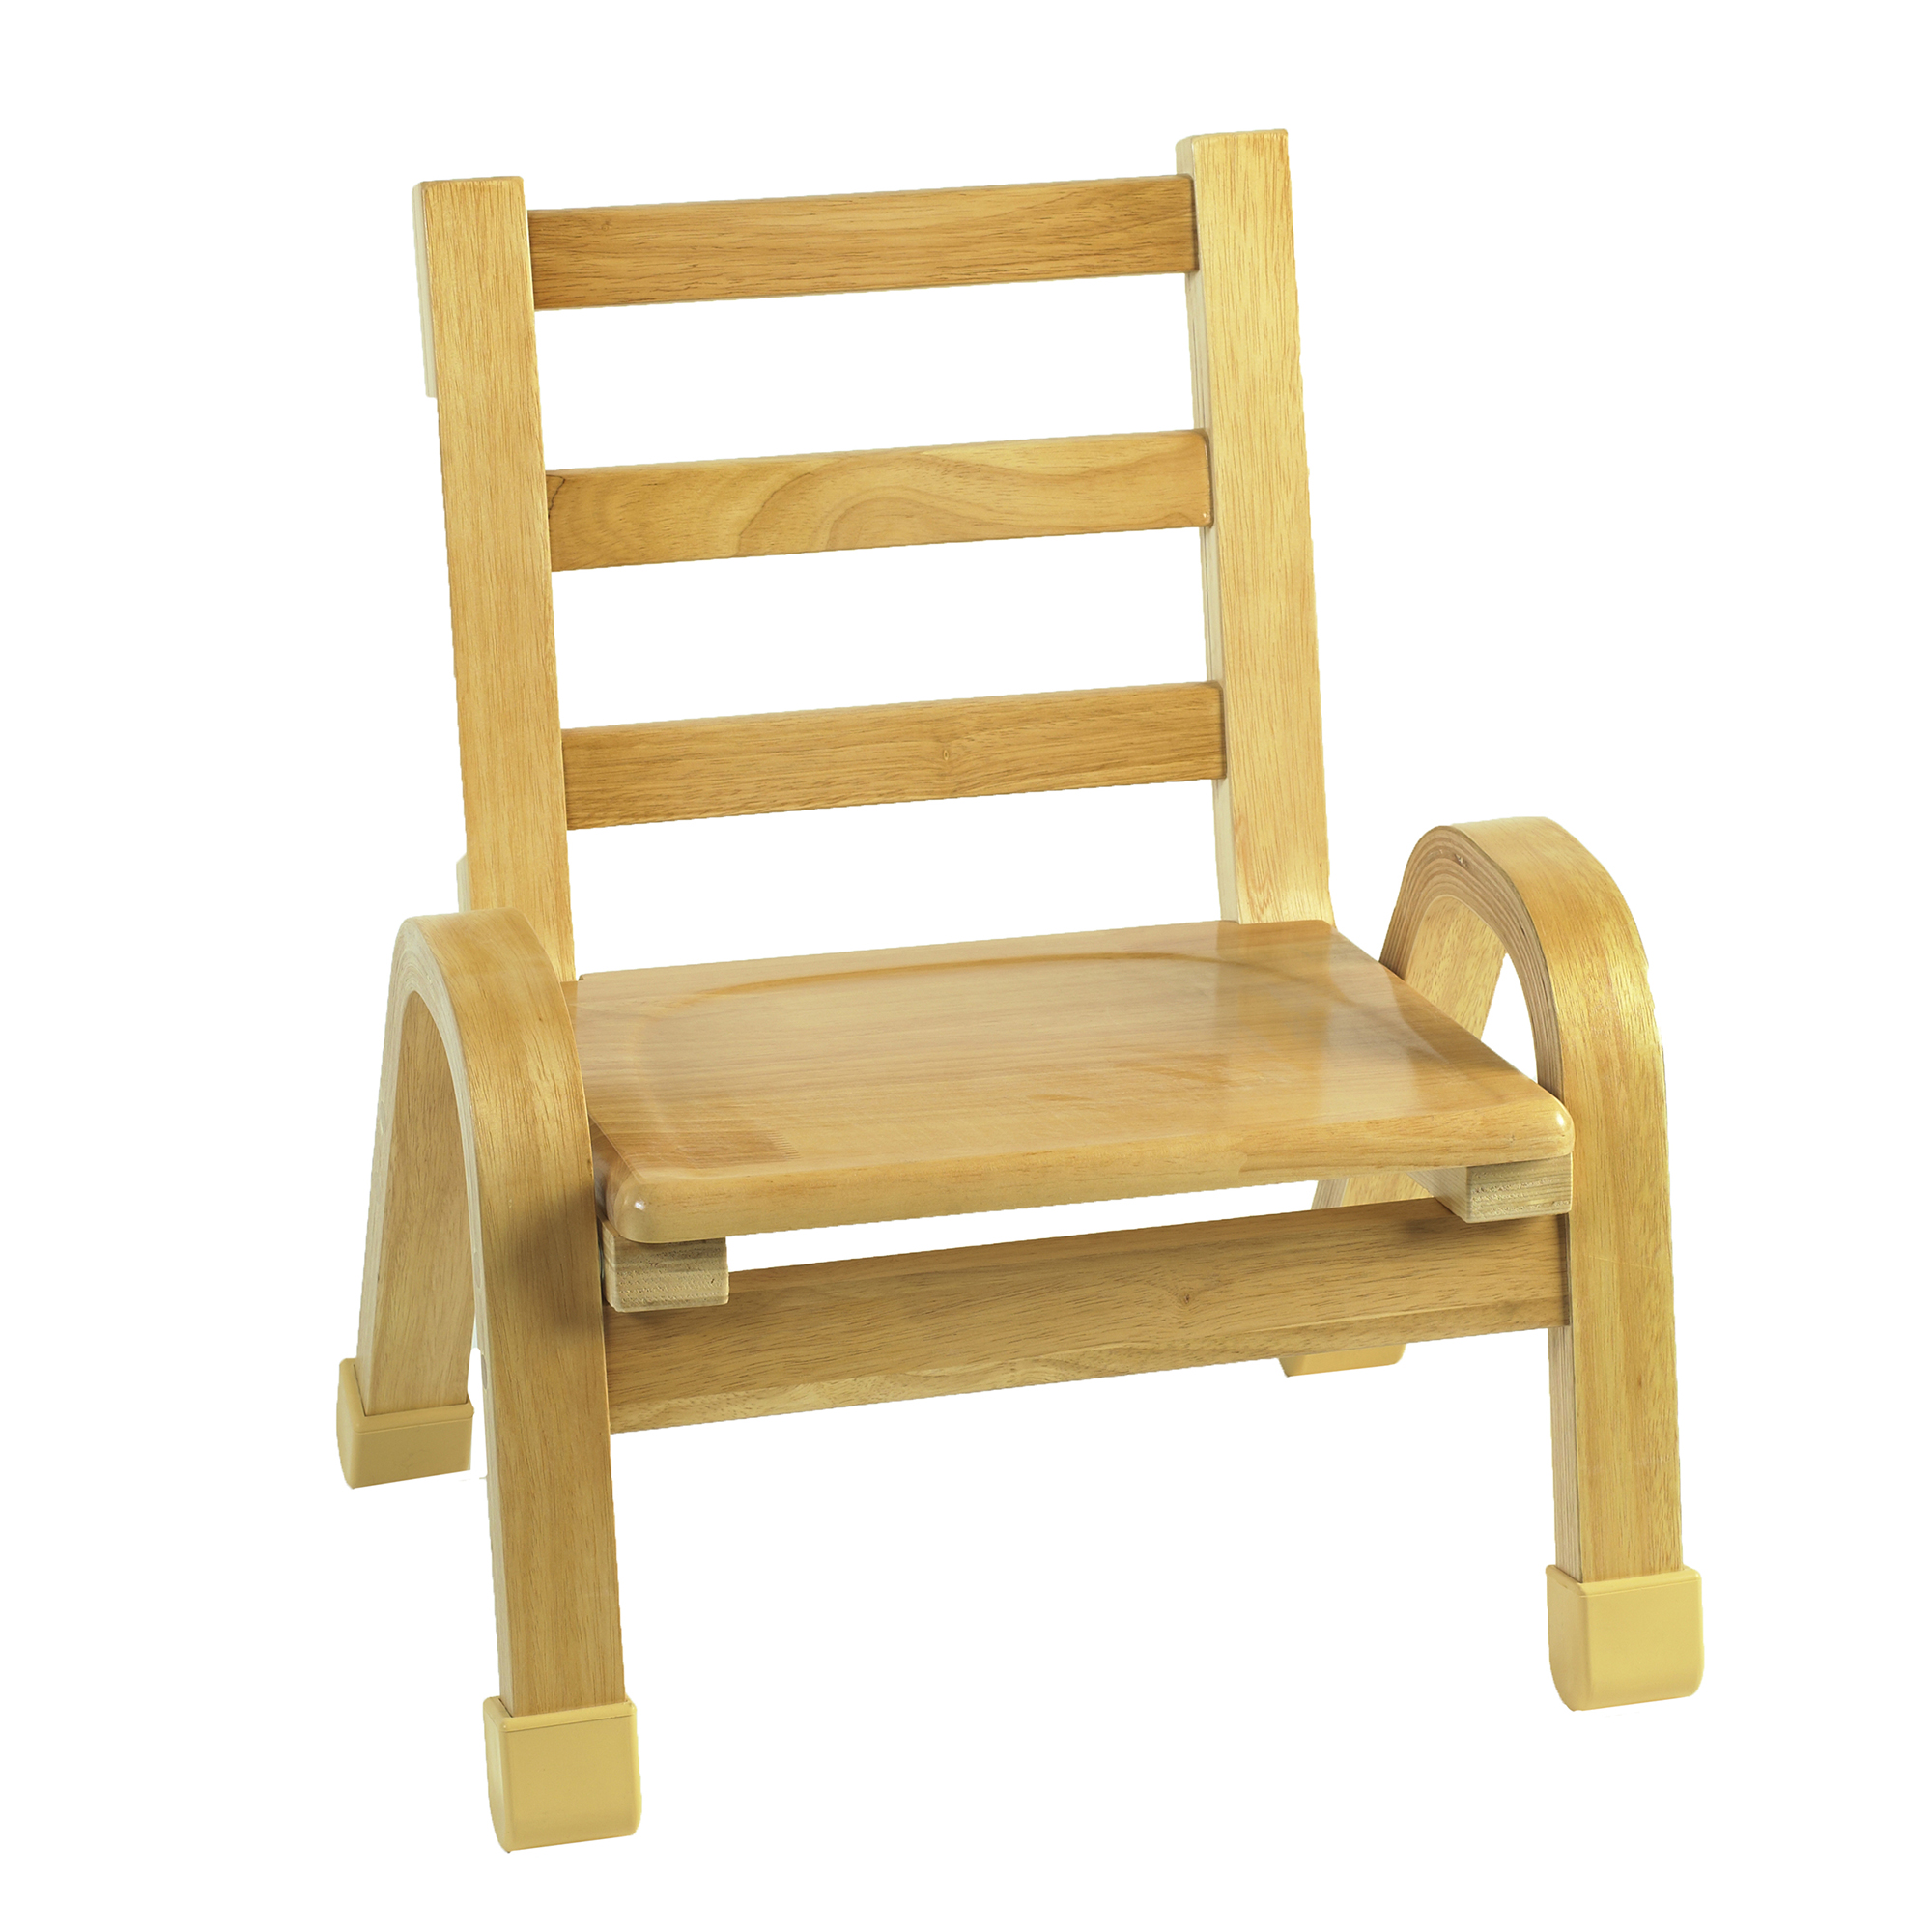 NaturalWood™ Collection 23 cm  Chair